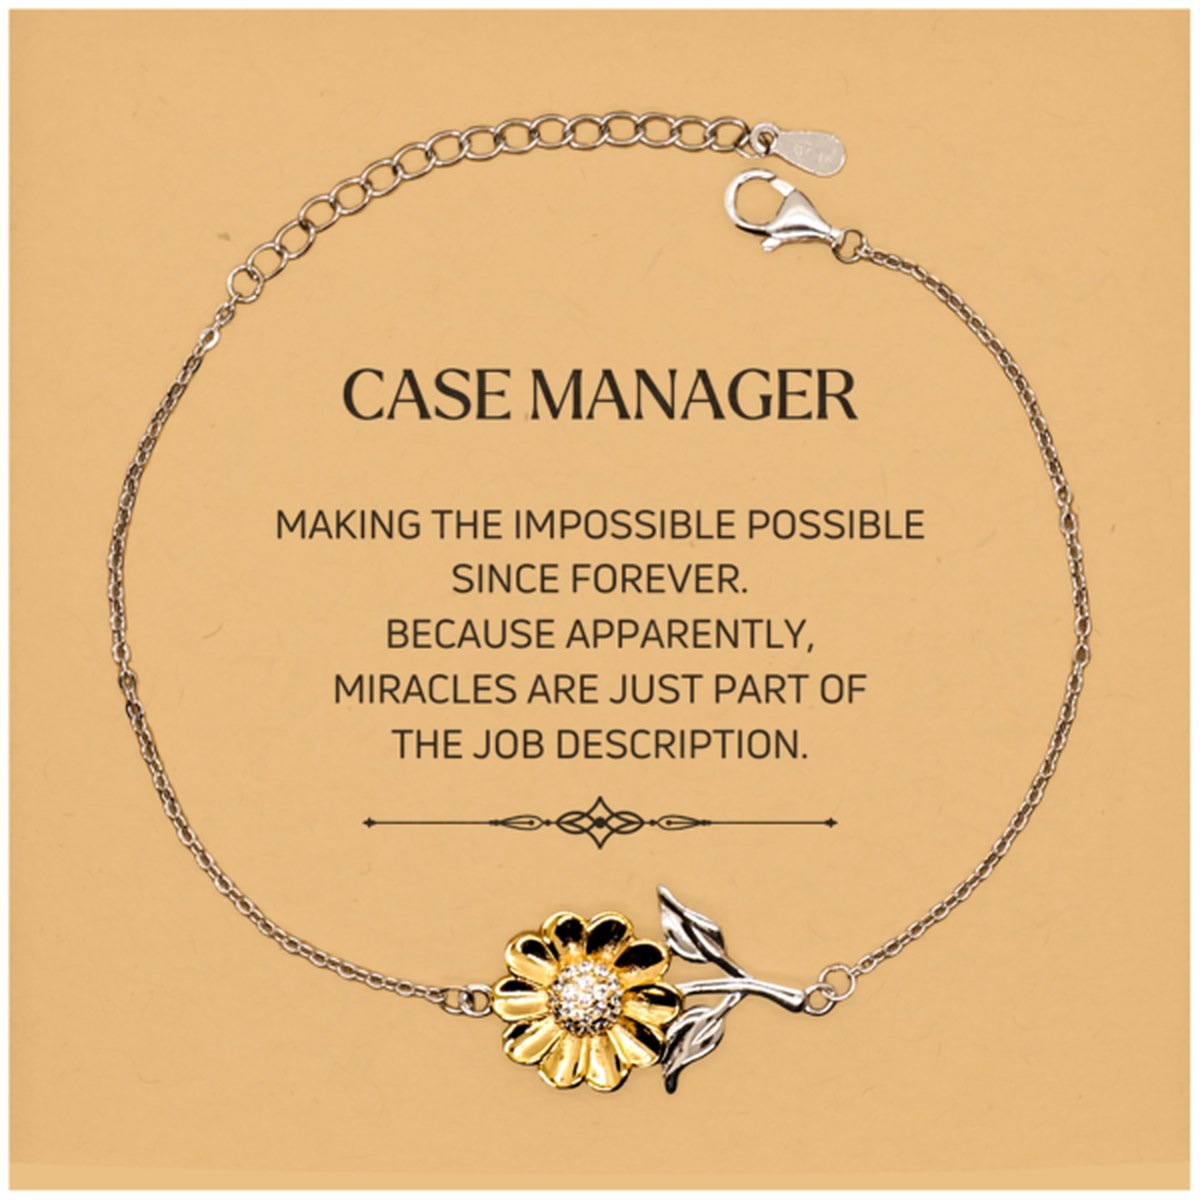 Funny Case Manager Gifts, Miracles are just part of the job description, Inspirational Birthday Christmas Sunflower Bracelet For Case Manager, Men, Women, Coworkers, Friends, Boss